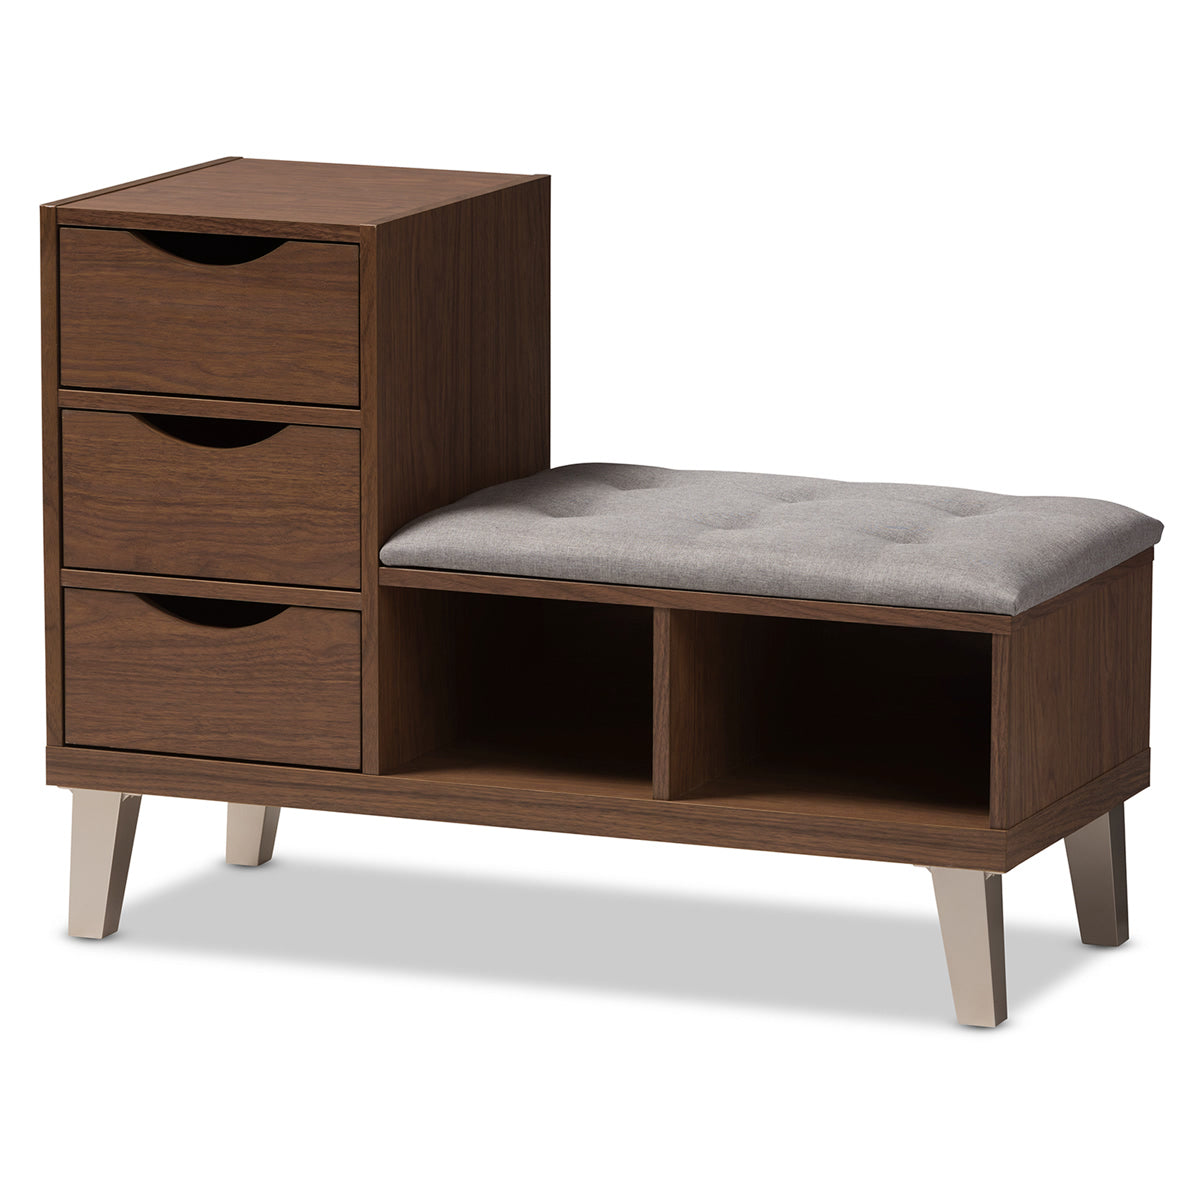 Baxton Studio Arielle Modern and Contemporary Walnut Wood 3-Drawer Shoe Storage Grey Fabric Upholstered Seating Bench with Two Open Shelves Baxton Studio-0-Minimal And Modern - 1